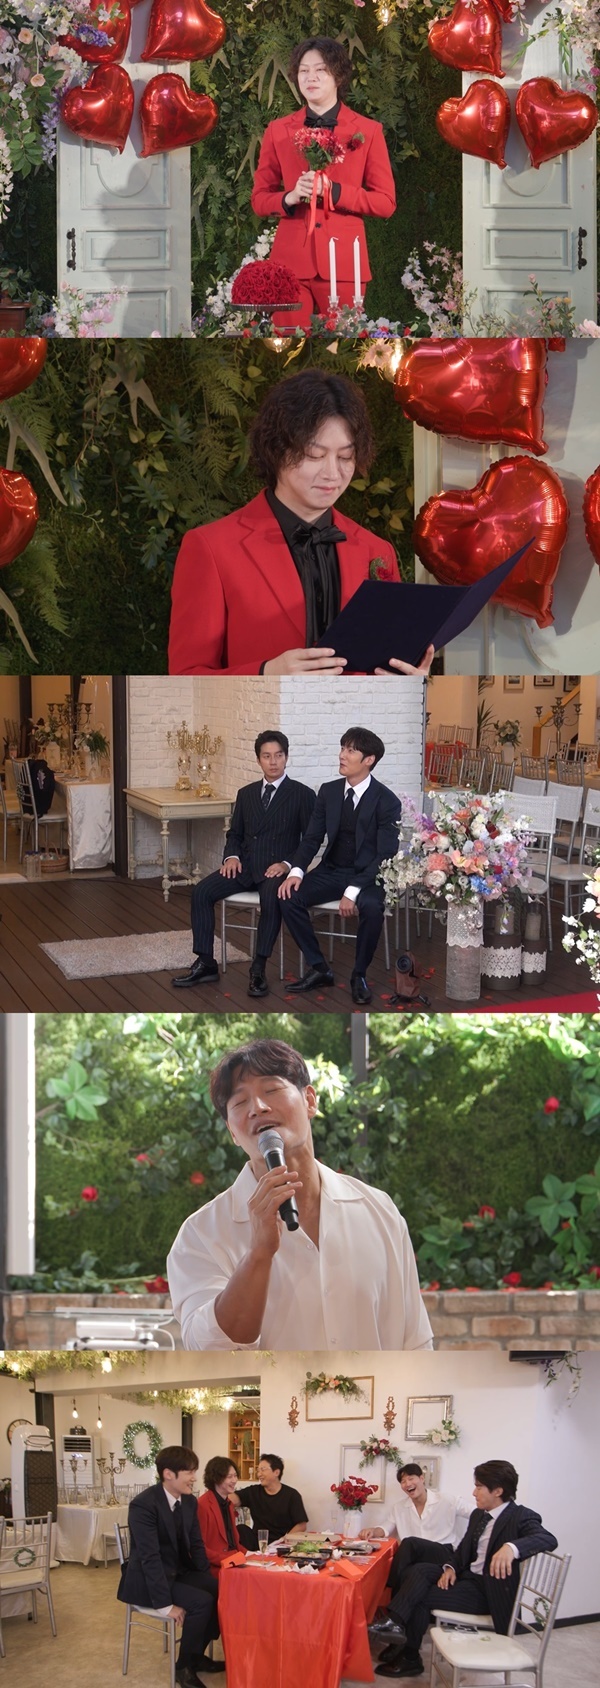 My Little Old Boy Kim Hee-chul posts Wedding CeremonyOn SBS My Little Old Boy, which is broadcasted on the 22nd night, Kim Hee-chuls Mystery Wedding ceremony scene, which her mother did not know, is revealed.On this day, Hee-chul declares that he will do a questioning ceremony. Hee-chul said, I wanted to break the prejudice that the groom should wear a black tuxedo. In the sudden announcement of the wedding ceremony, the Movengers are puzzled, saying, What happened to Hee-chul? and Are you going to get married? What is the Hee-chul Mother doing?Tak Jae-hun, Kim Jong-kook, Heo Kyung-hwan, and Choi Jin-hyuk, who were invited to Hee-chuls Wedding ceremony, could not hide their curiosity when they saw the red Virgin Road and the bride who could not be seen anywhere.With the appearance of todays hero, Hee-chul, the mystery of the mystery wedding ceremony was revealed, and the scene turned upside down. Hee-chul Mother is tearful, he says.In addition, Choi Jin-hyuk, who attended the wedding ceremony, said, I had a girlfriend who thought about marriage in the past.However, Choi Jin-hyuk is saddened by the confessions of a shocking event that she found out that she had been in love for over a year.